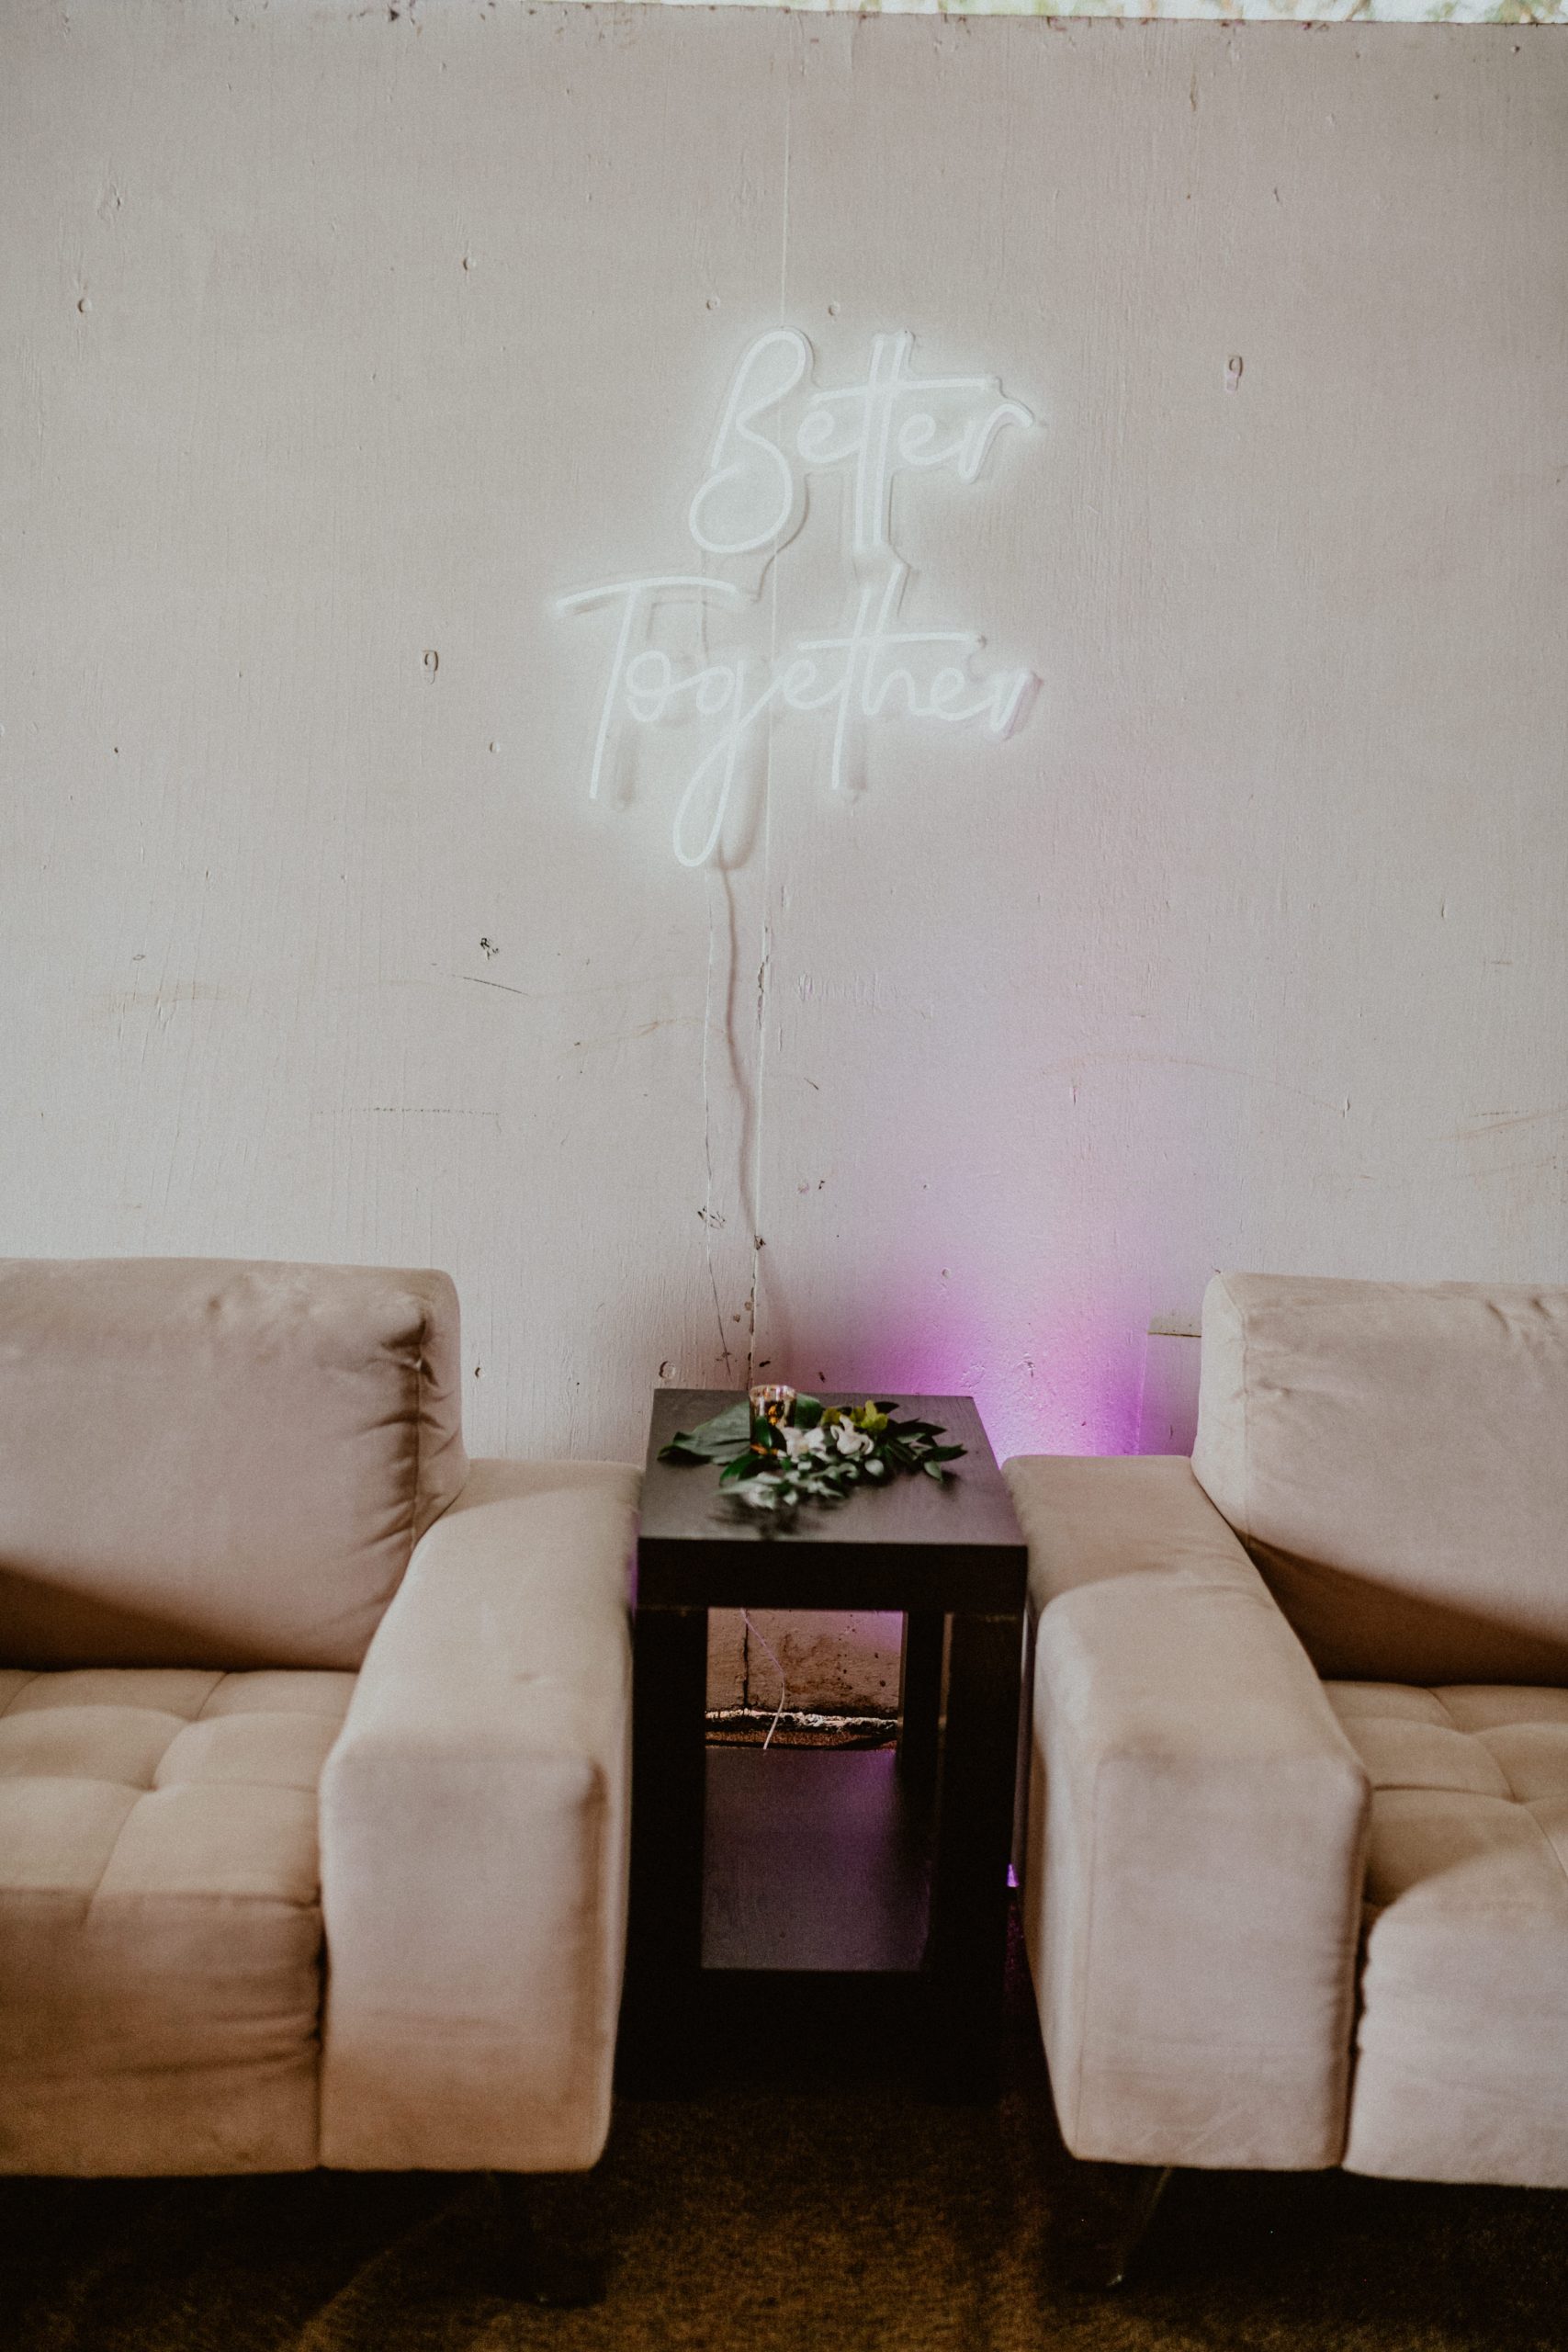 Moody Wedding Event inspiration of led light and flowers | Oahu Wedding Photographer, Oahu Elopement Photographer, Destination Wedding Photographer, Destination Elopement Photographer, Newlywed moments ideas, Newlywed Photography inspiration, Hawaii Elopement ideas | chelseaabril.com